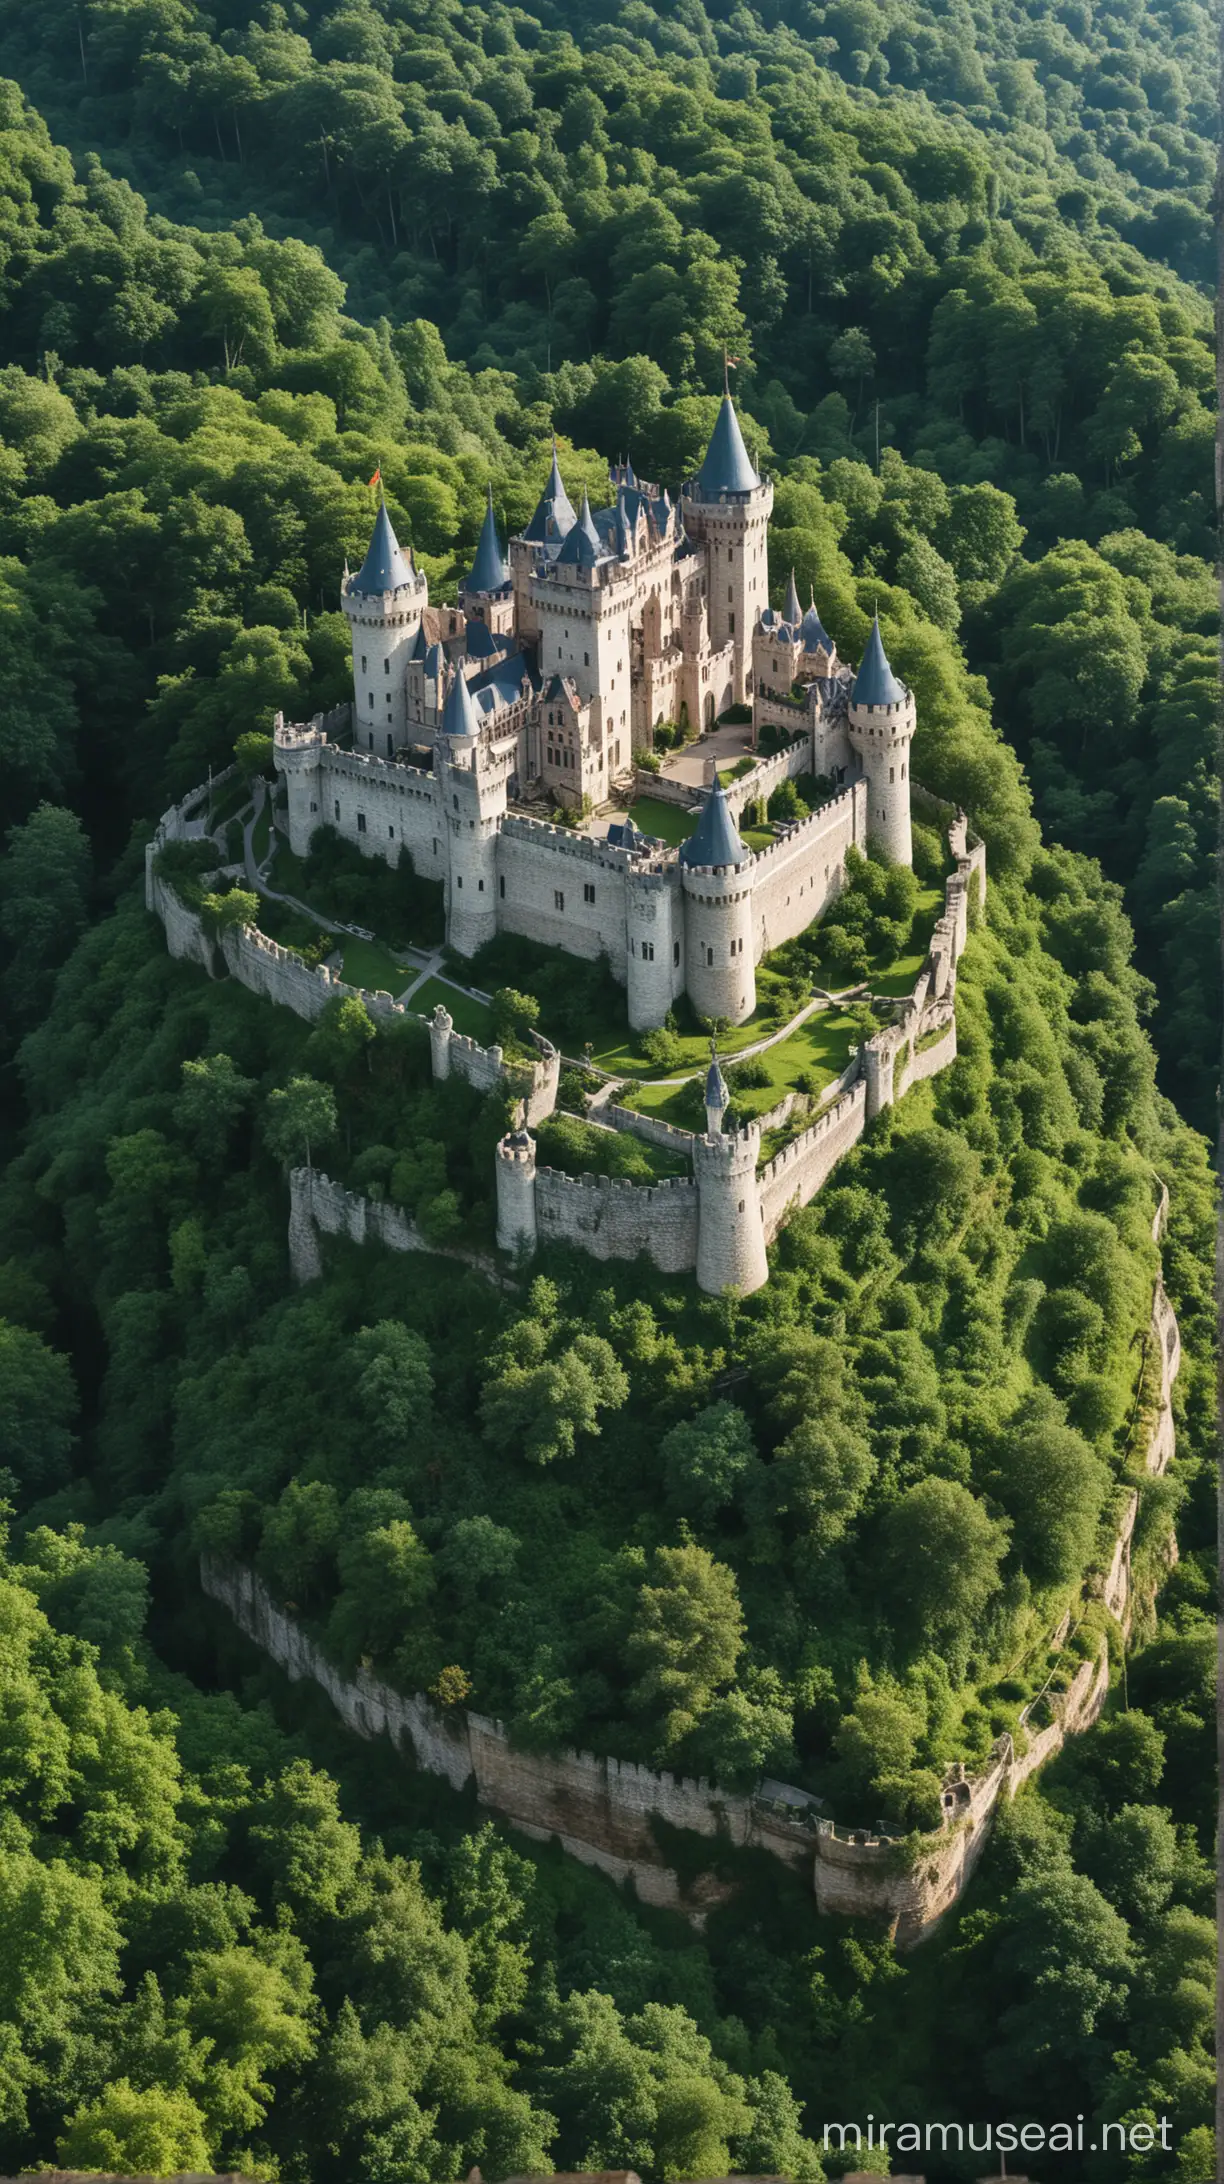 A kingdom with a majestic, old castle surrounded by lush greenery.